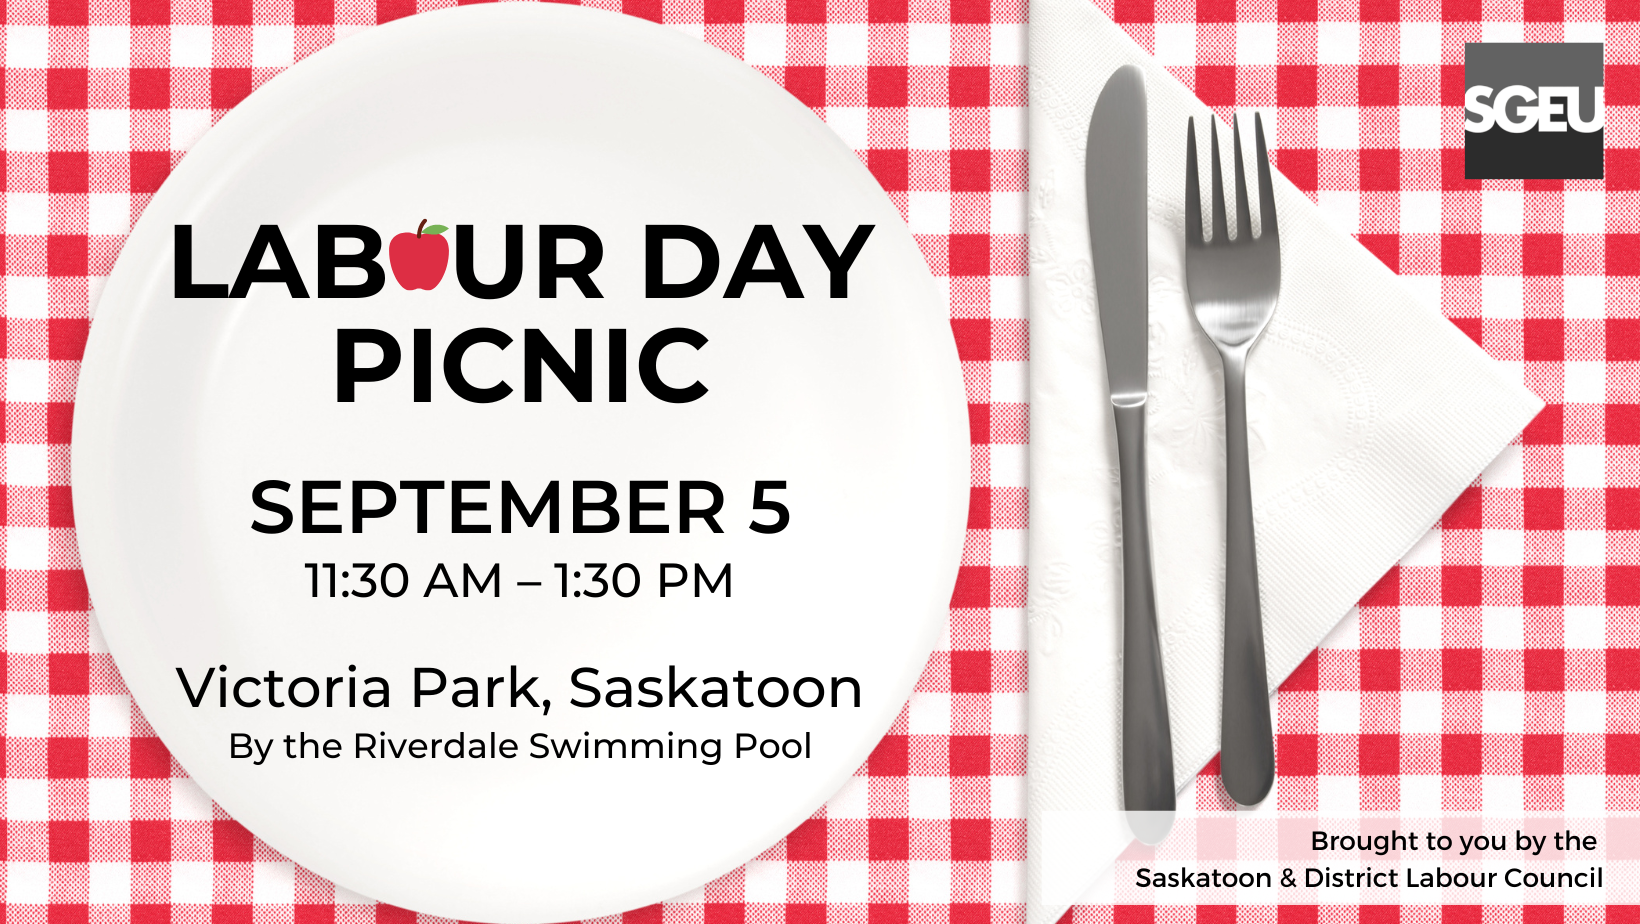 A place setting is on a red and white checkered tablecloth. The text has info about the Labour Day picnic.